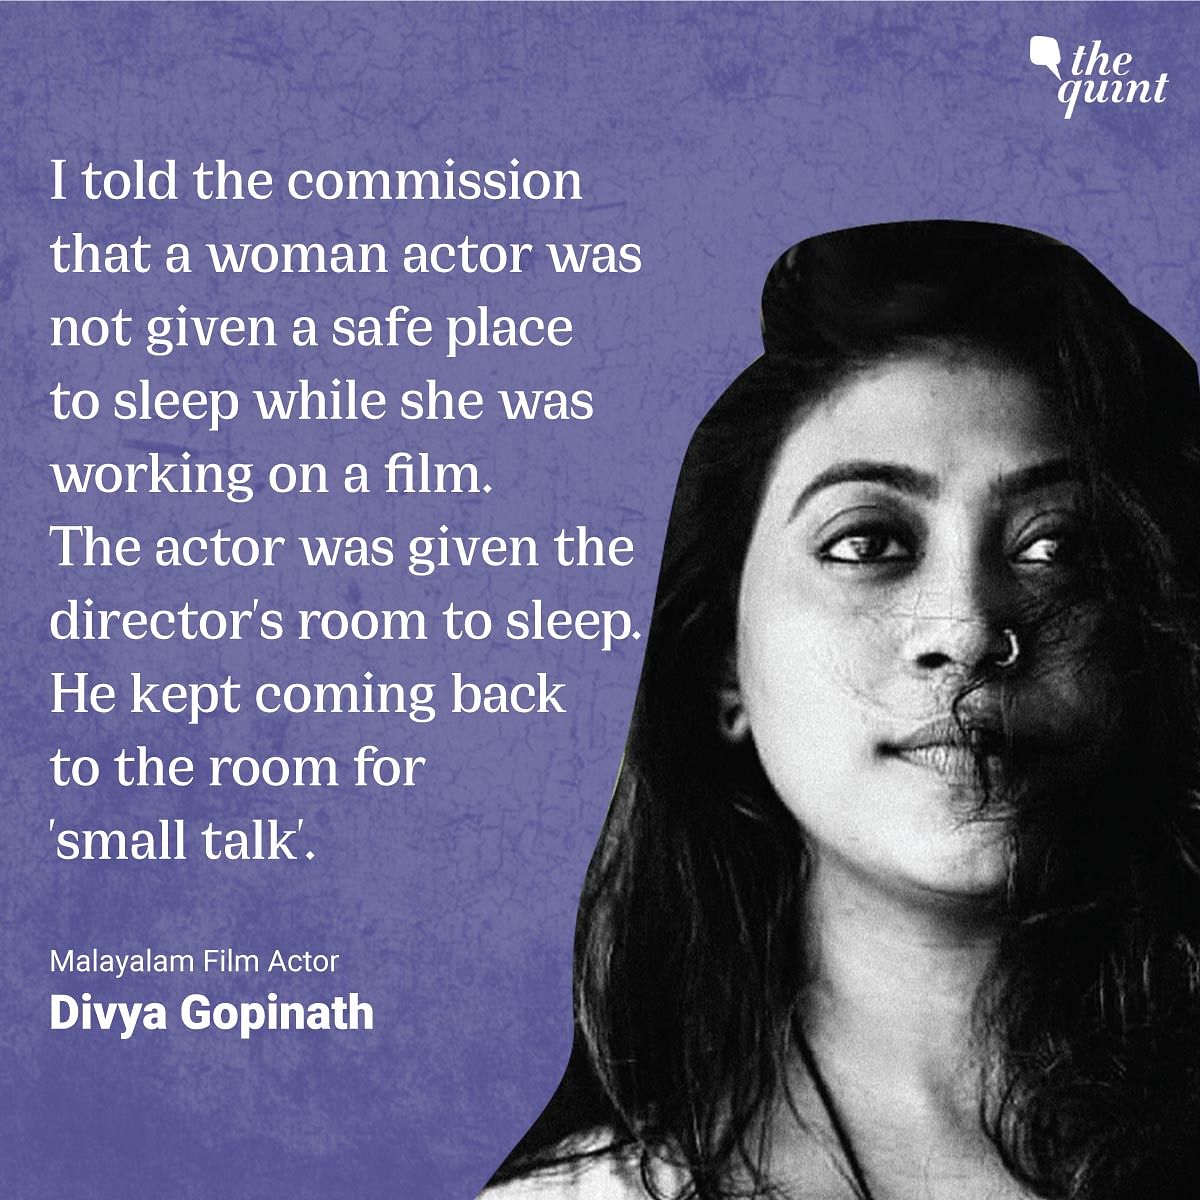 Divya Gopinath says she is speaking up to make Hema Committee reveal its findings and recommendations.